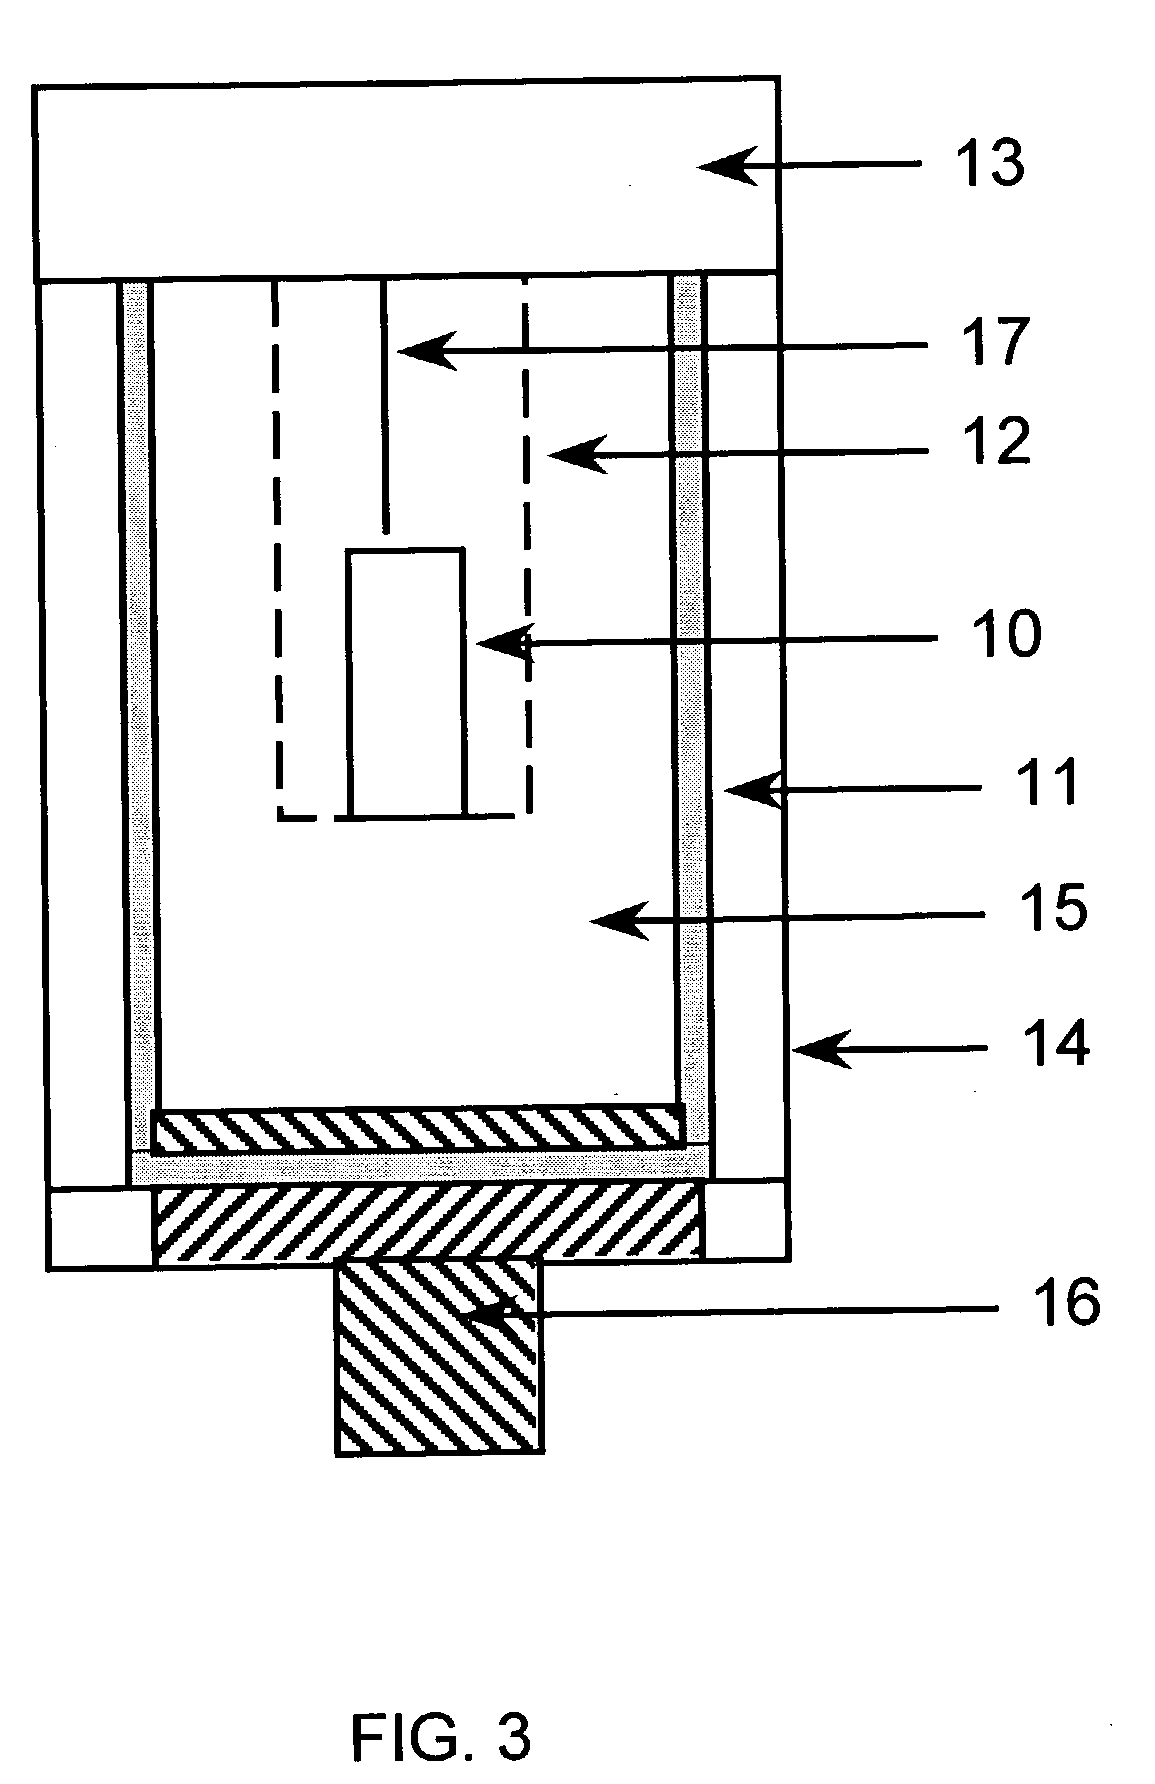 Method of using low temperature and high/low pressure processing to preserve food products